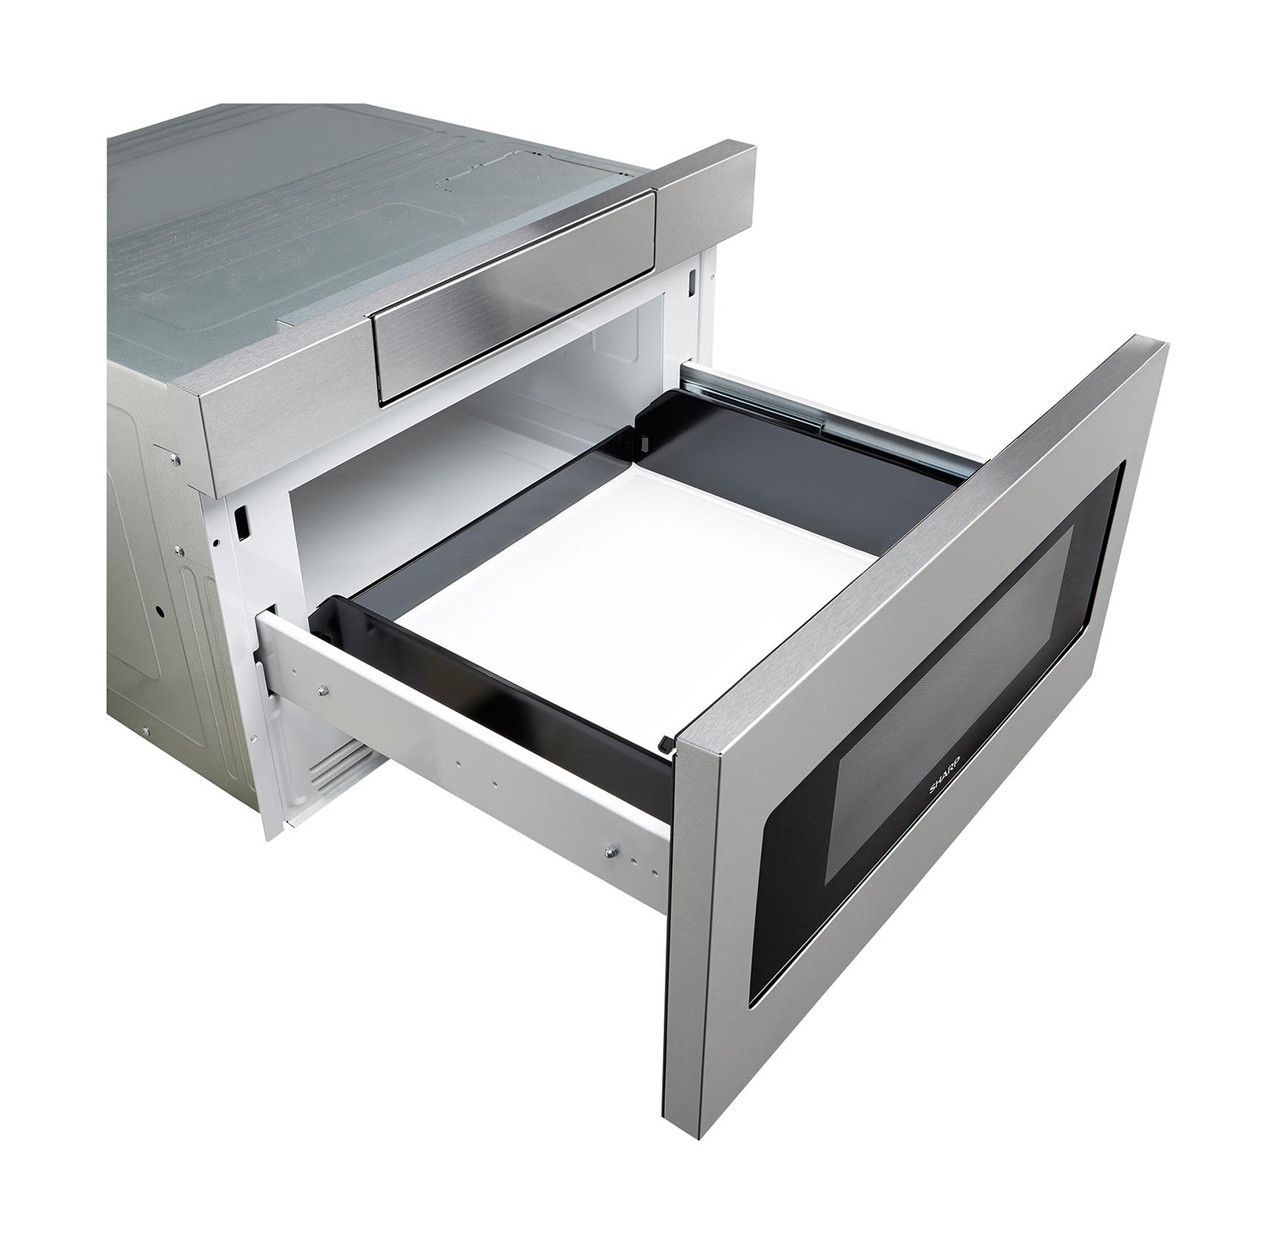 30-inch Sharp Microwave Drawer (SMD3070AS) – angled right, open drawer